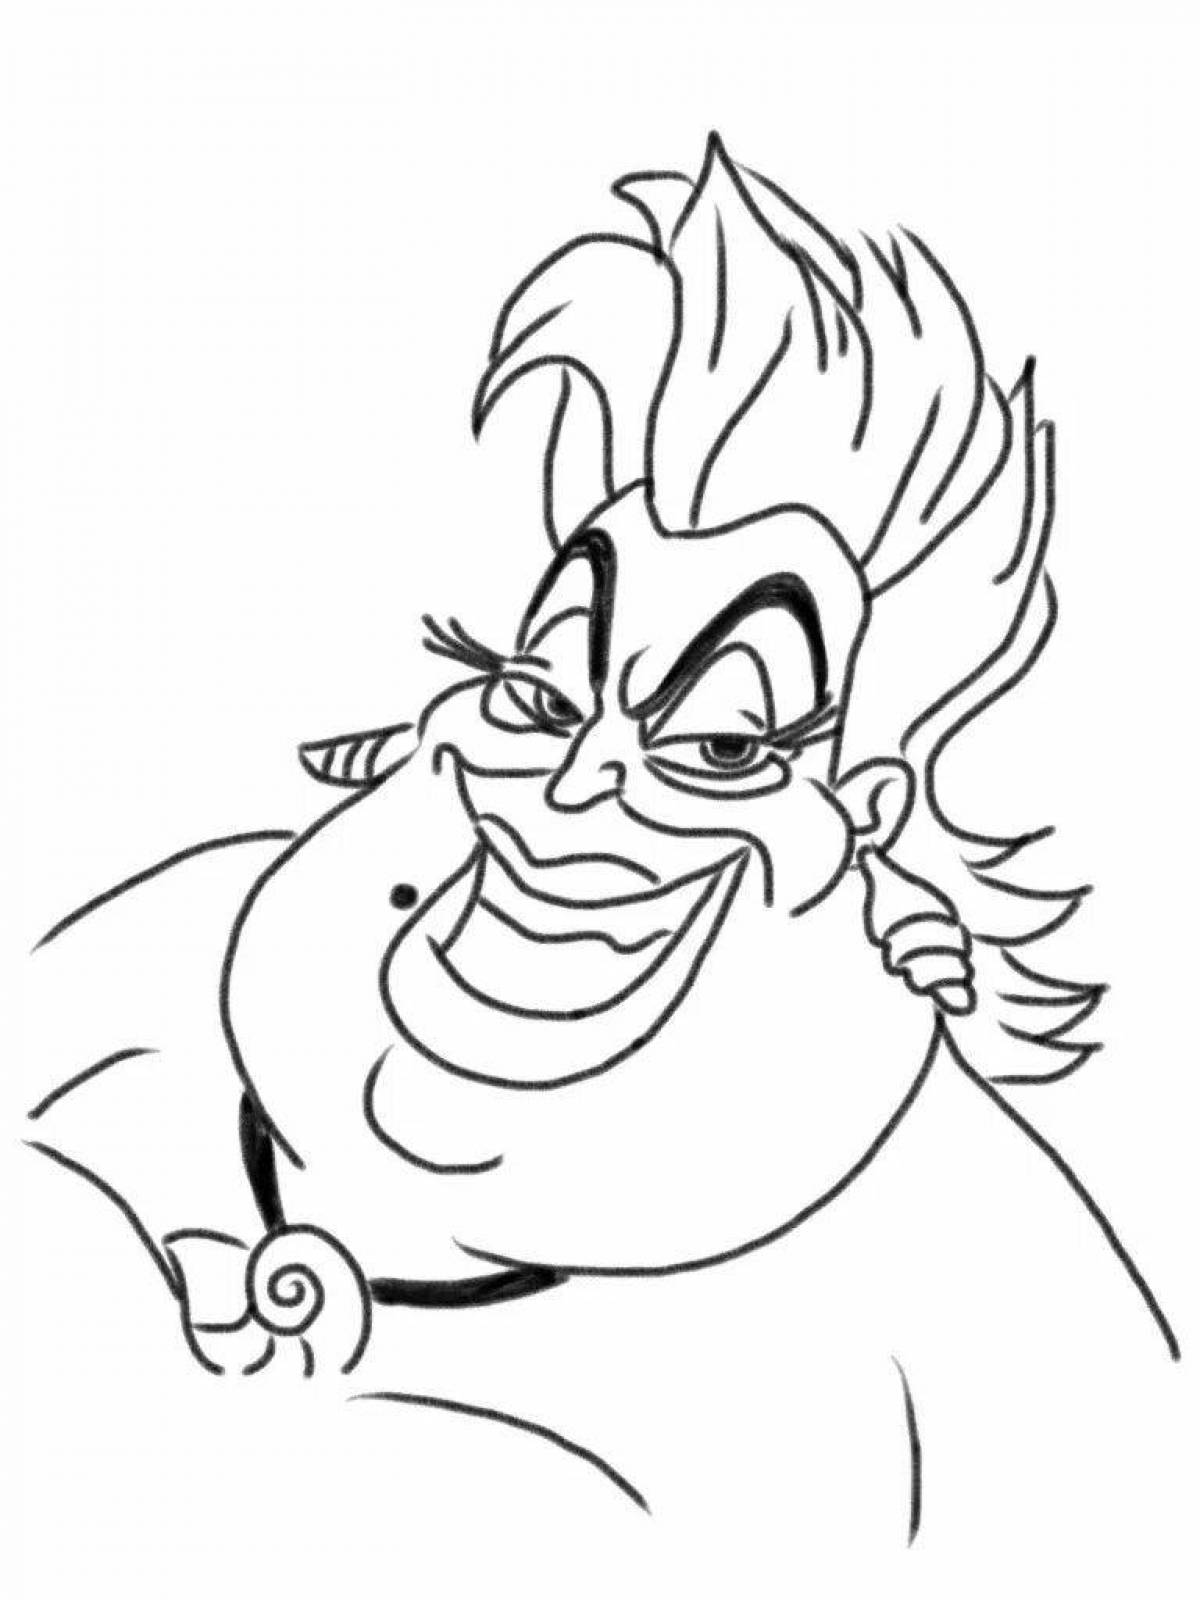 Awesome ursula coloring book